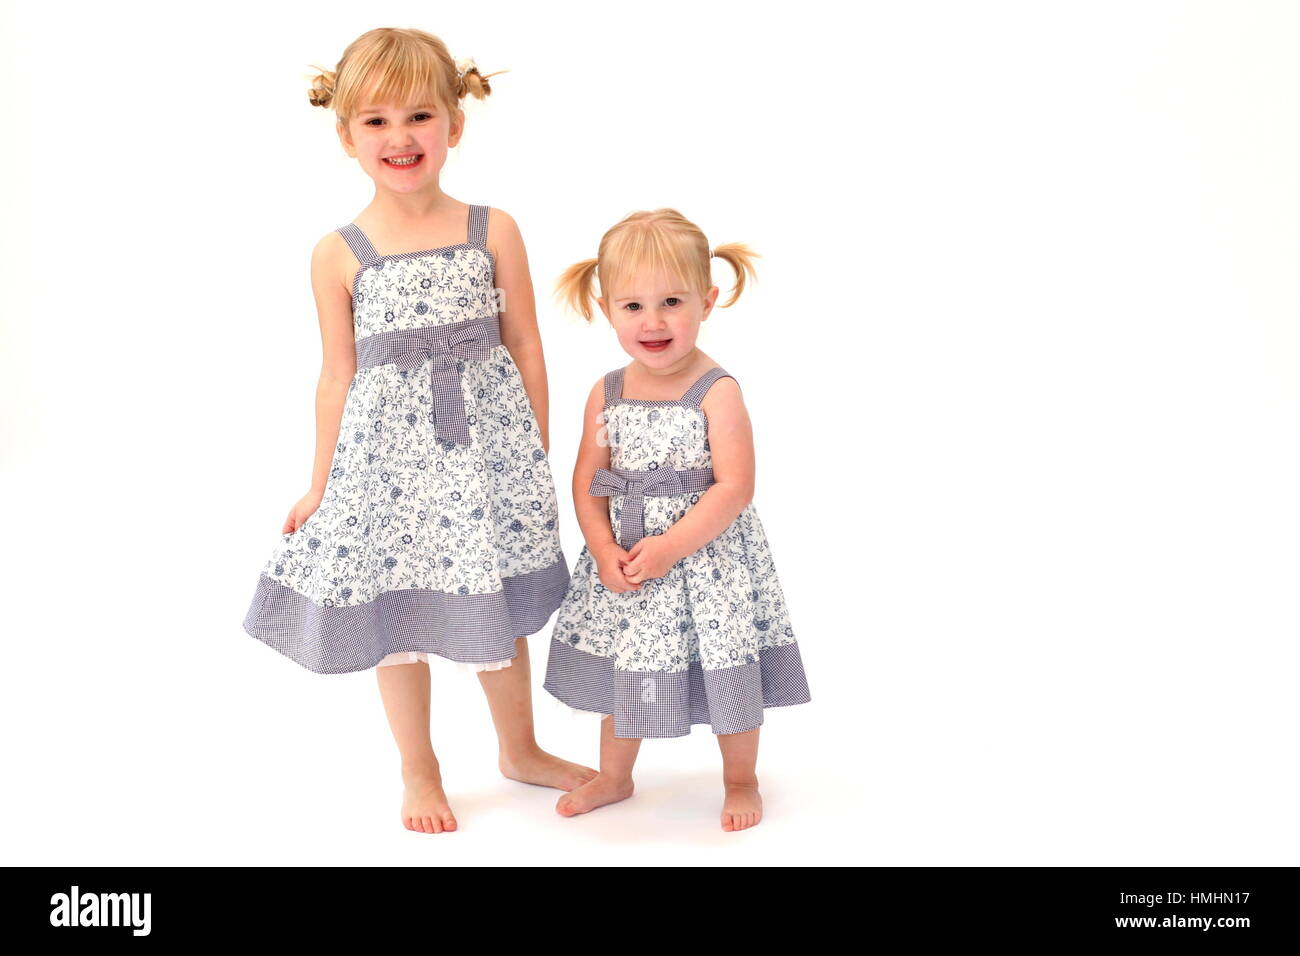 Little girls / sisters / children dressed in matching dresses with blonde pigtails in their hair Stock Photo